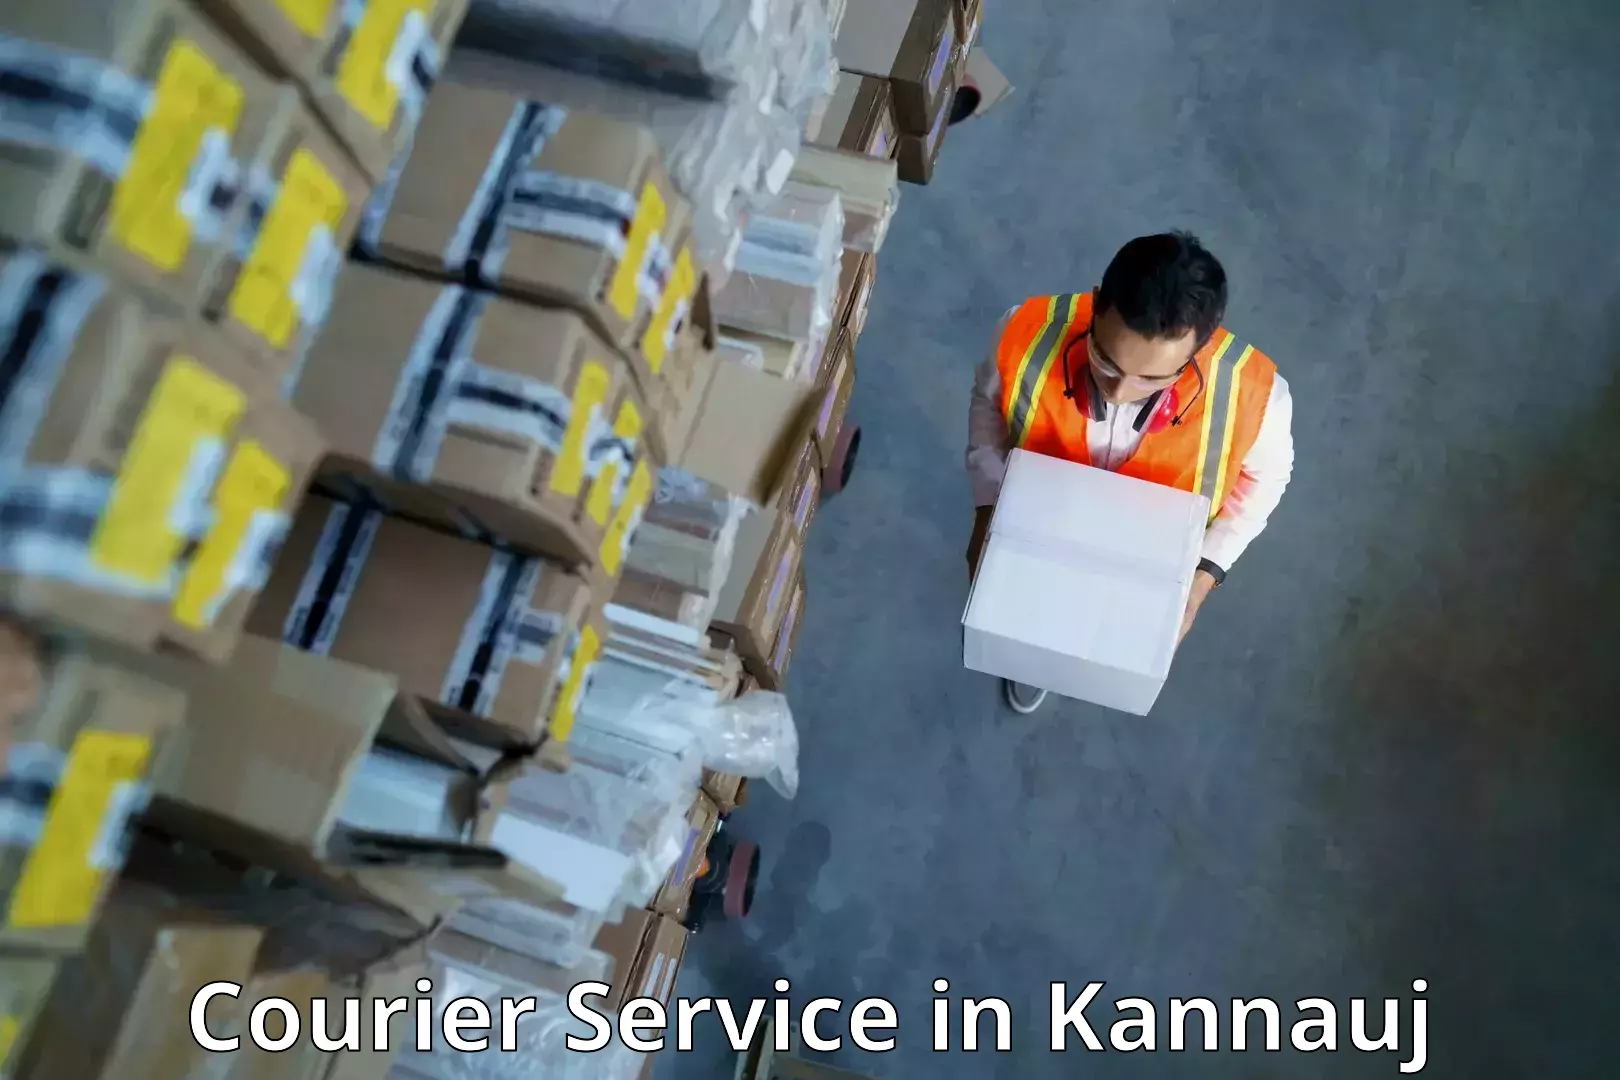 Parcel delivery automation in Kannauj